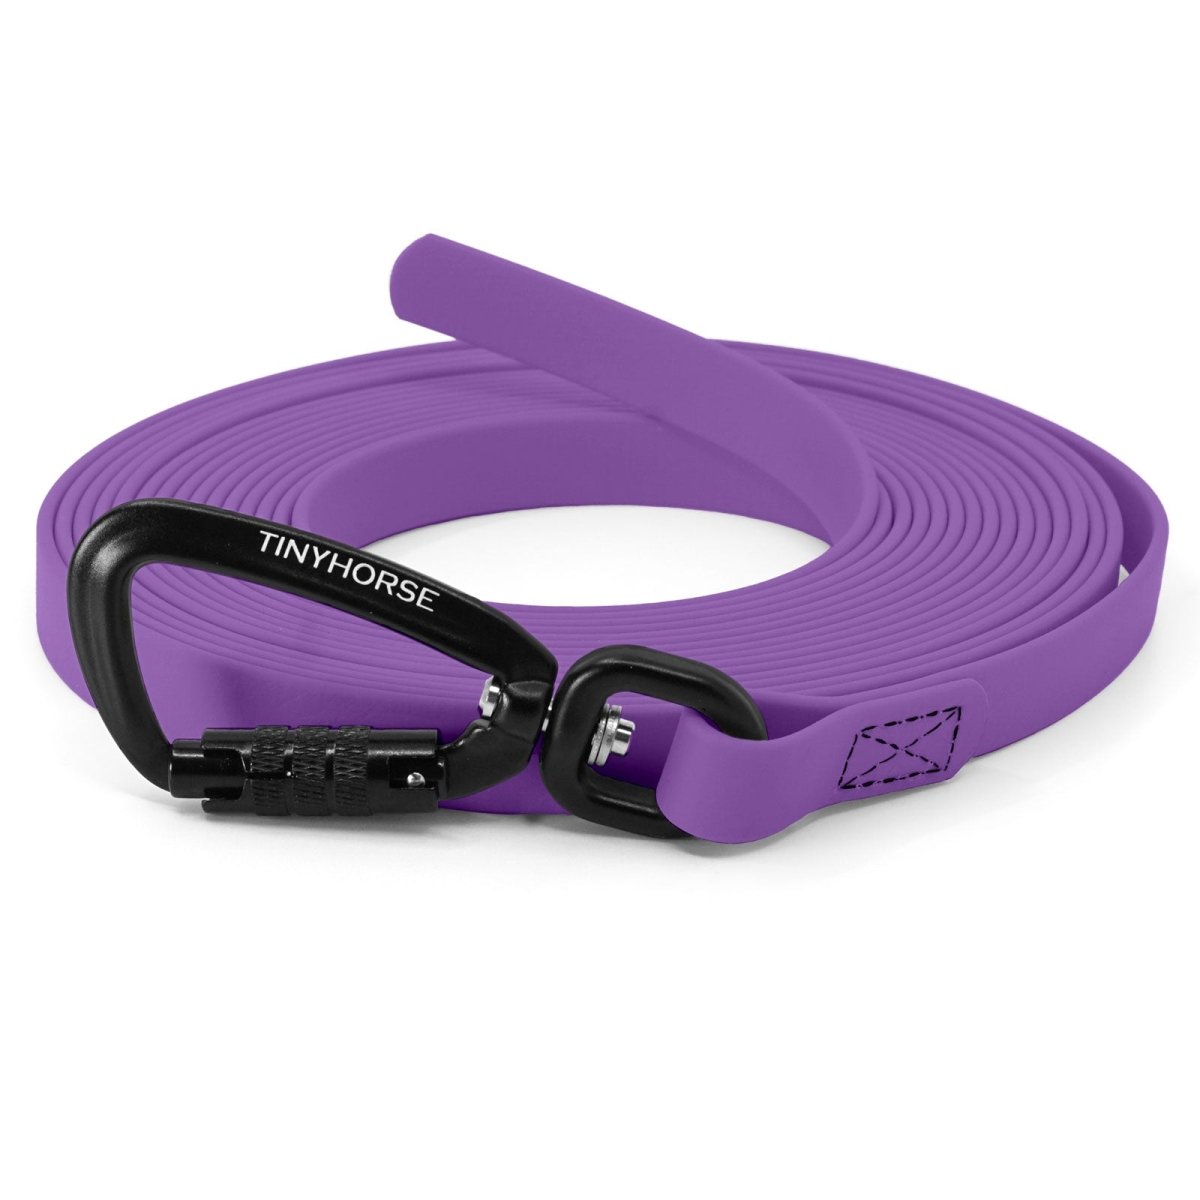 A lilac, handle-less long line with an auto-locking carabiner